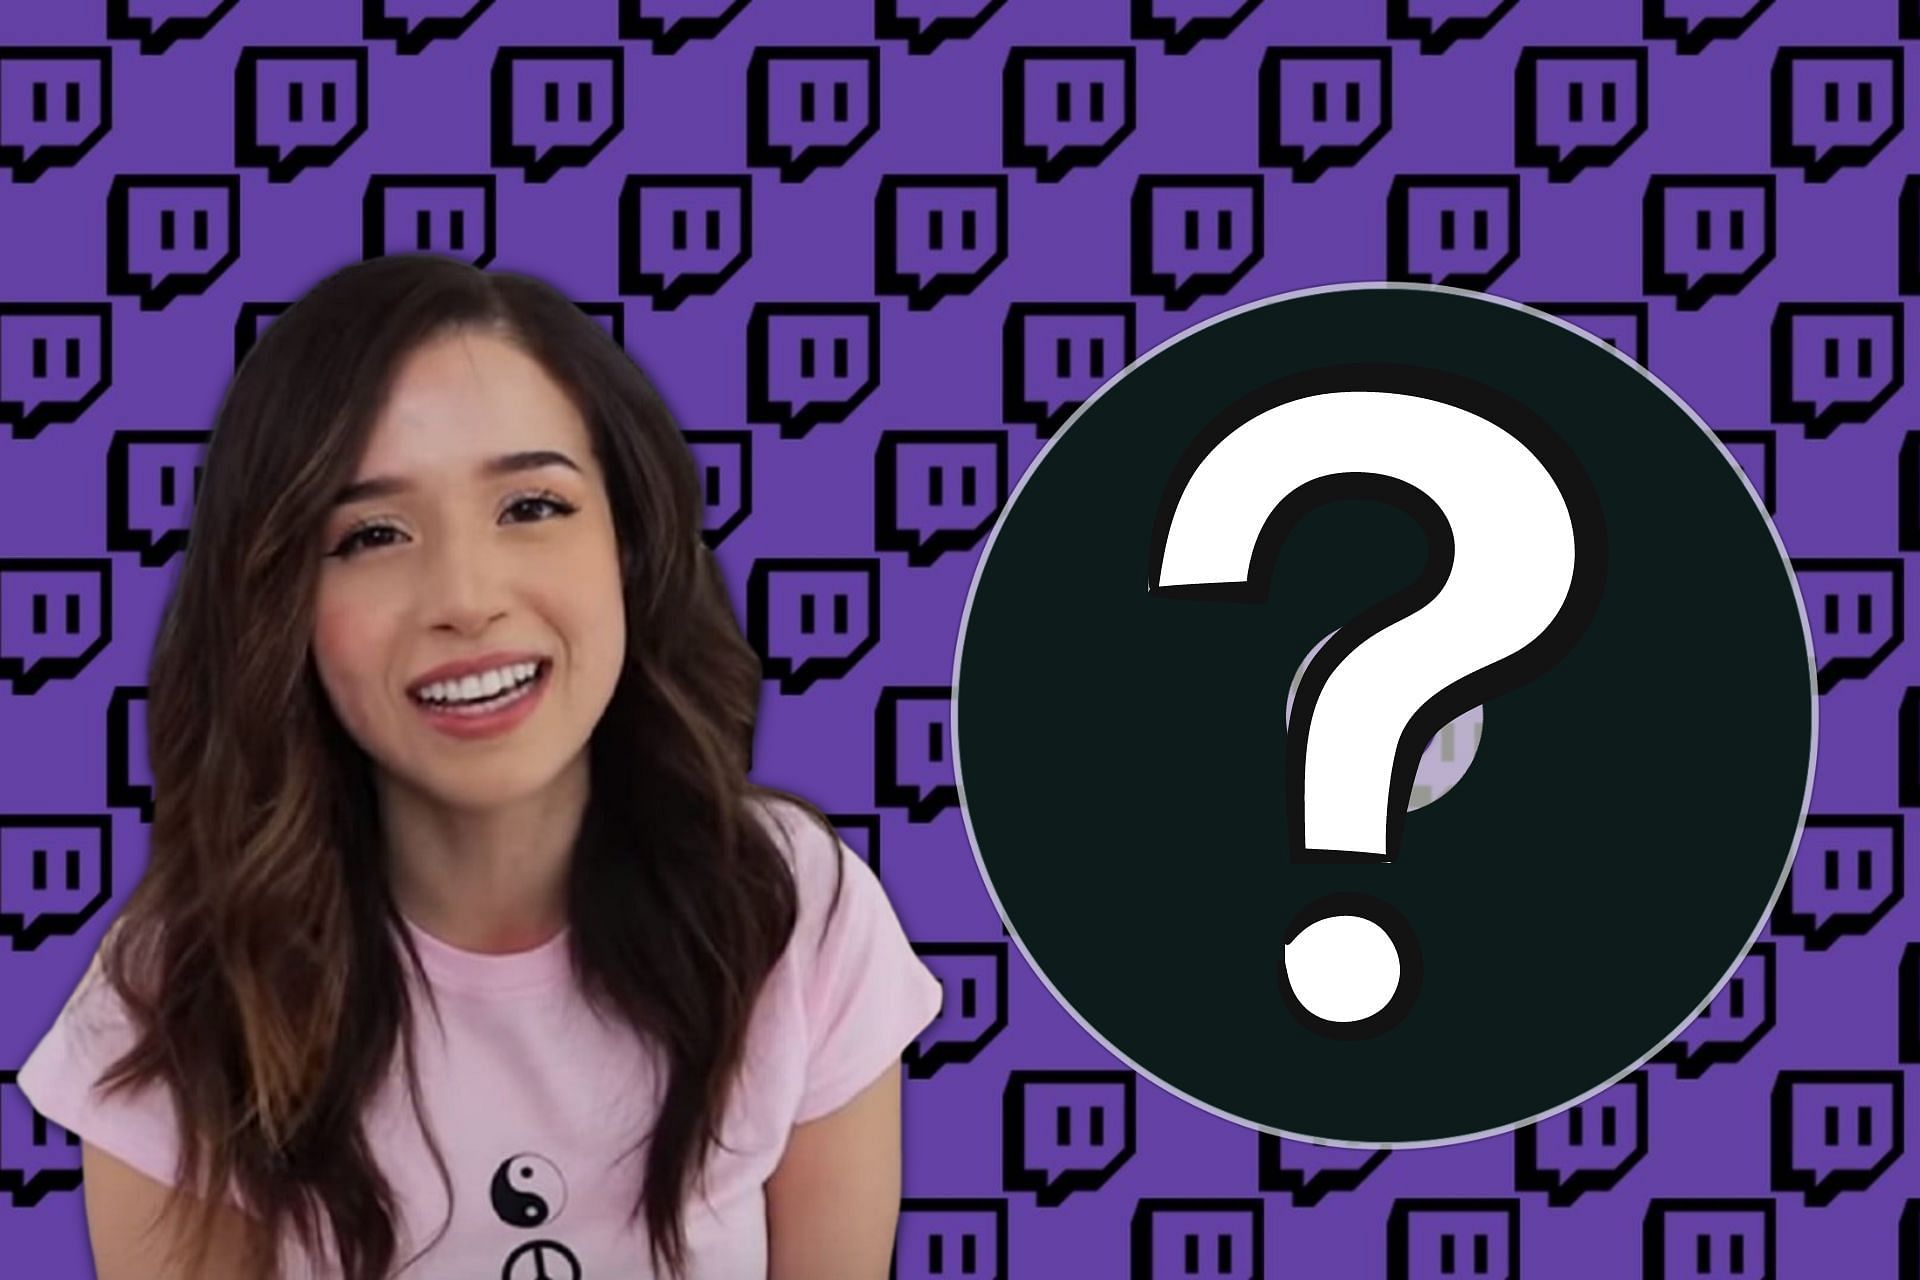 Which game did Pokimane stream the most in 2021?